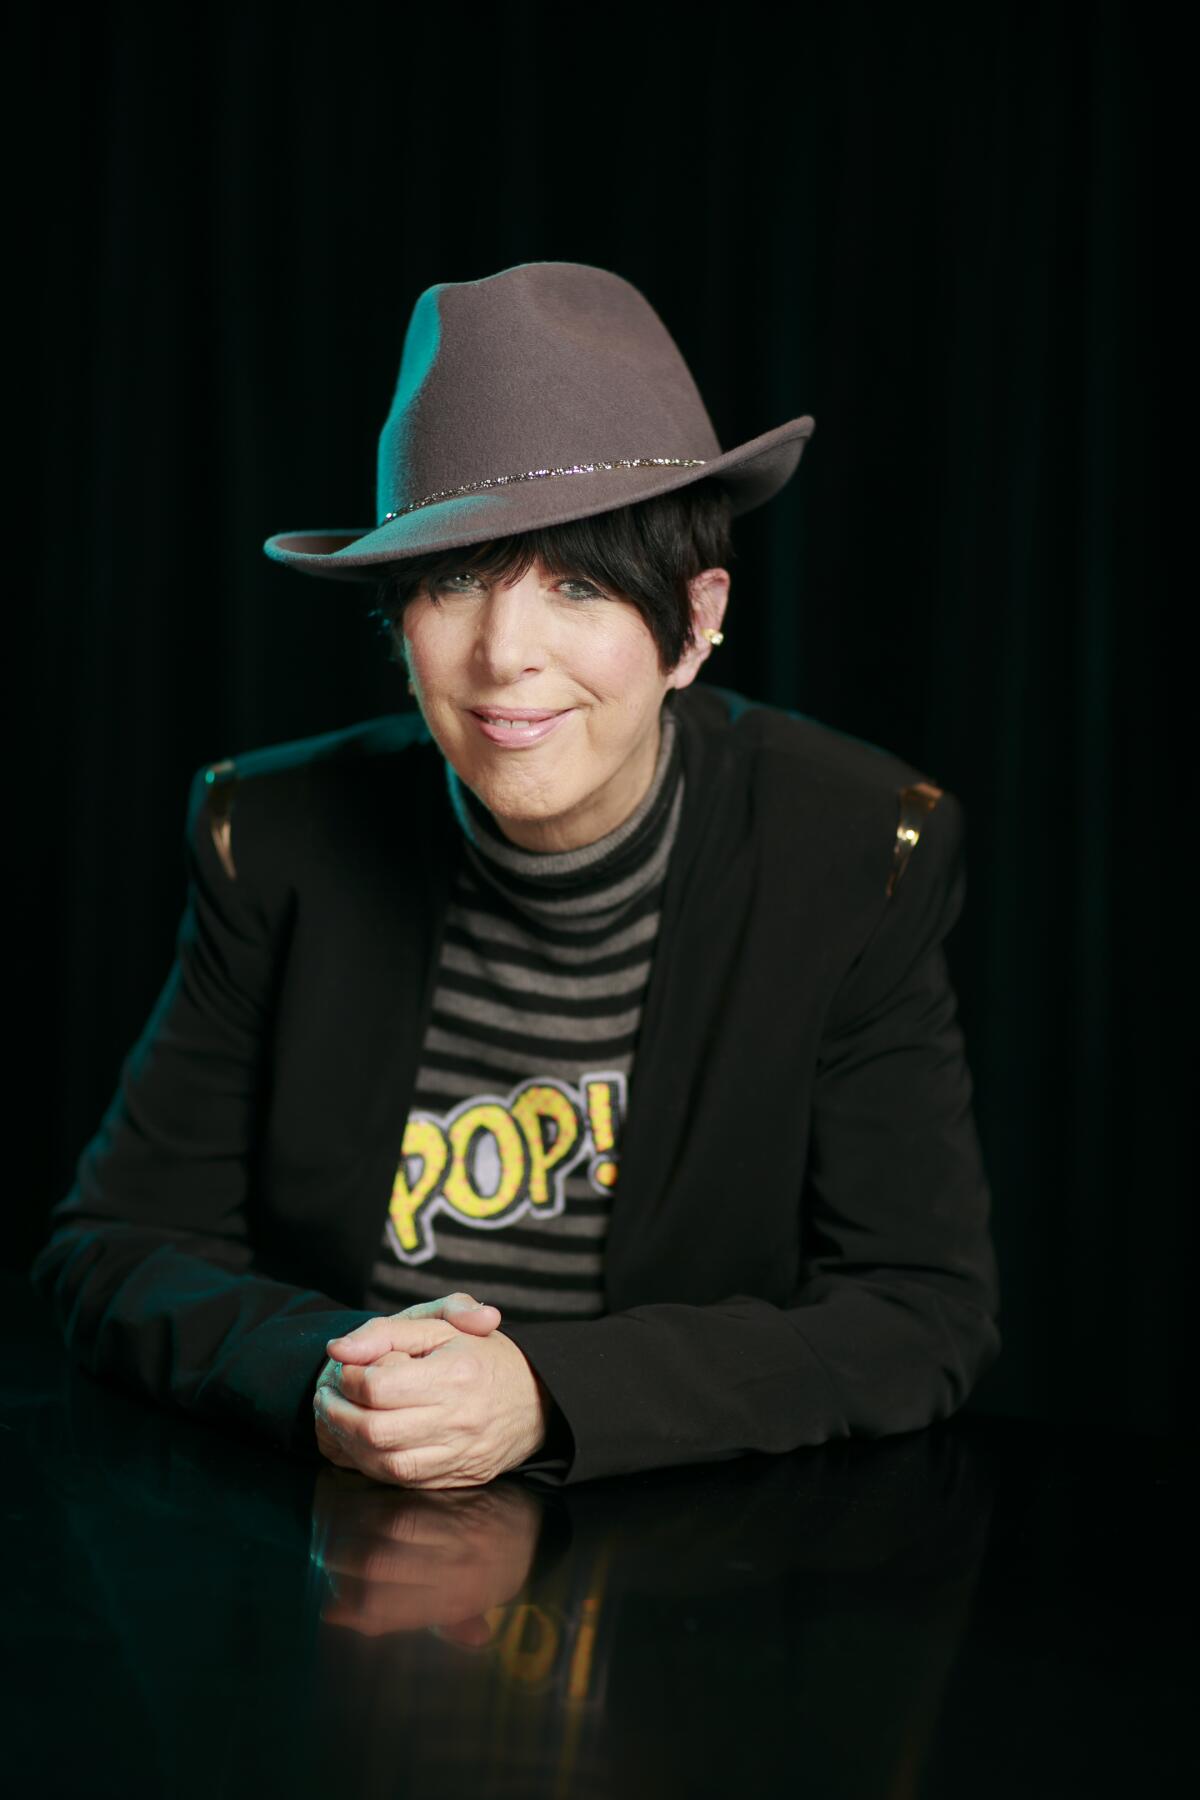 Songwriter Diane Warren poses for a portrait in a hat and shirt that reads Pop!